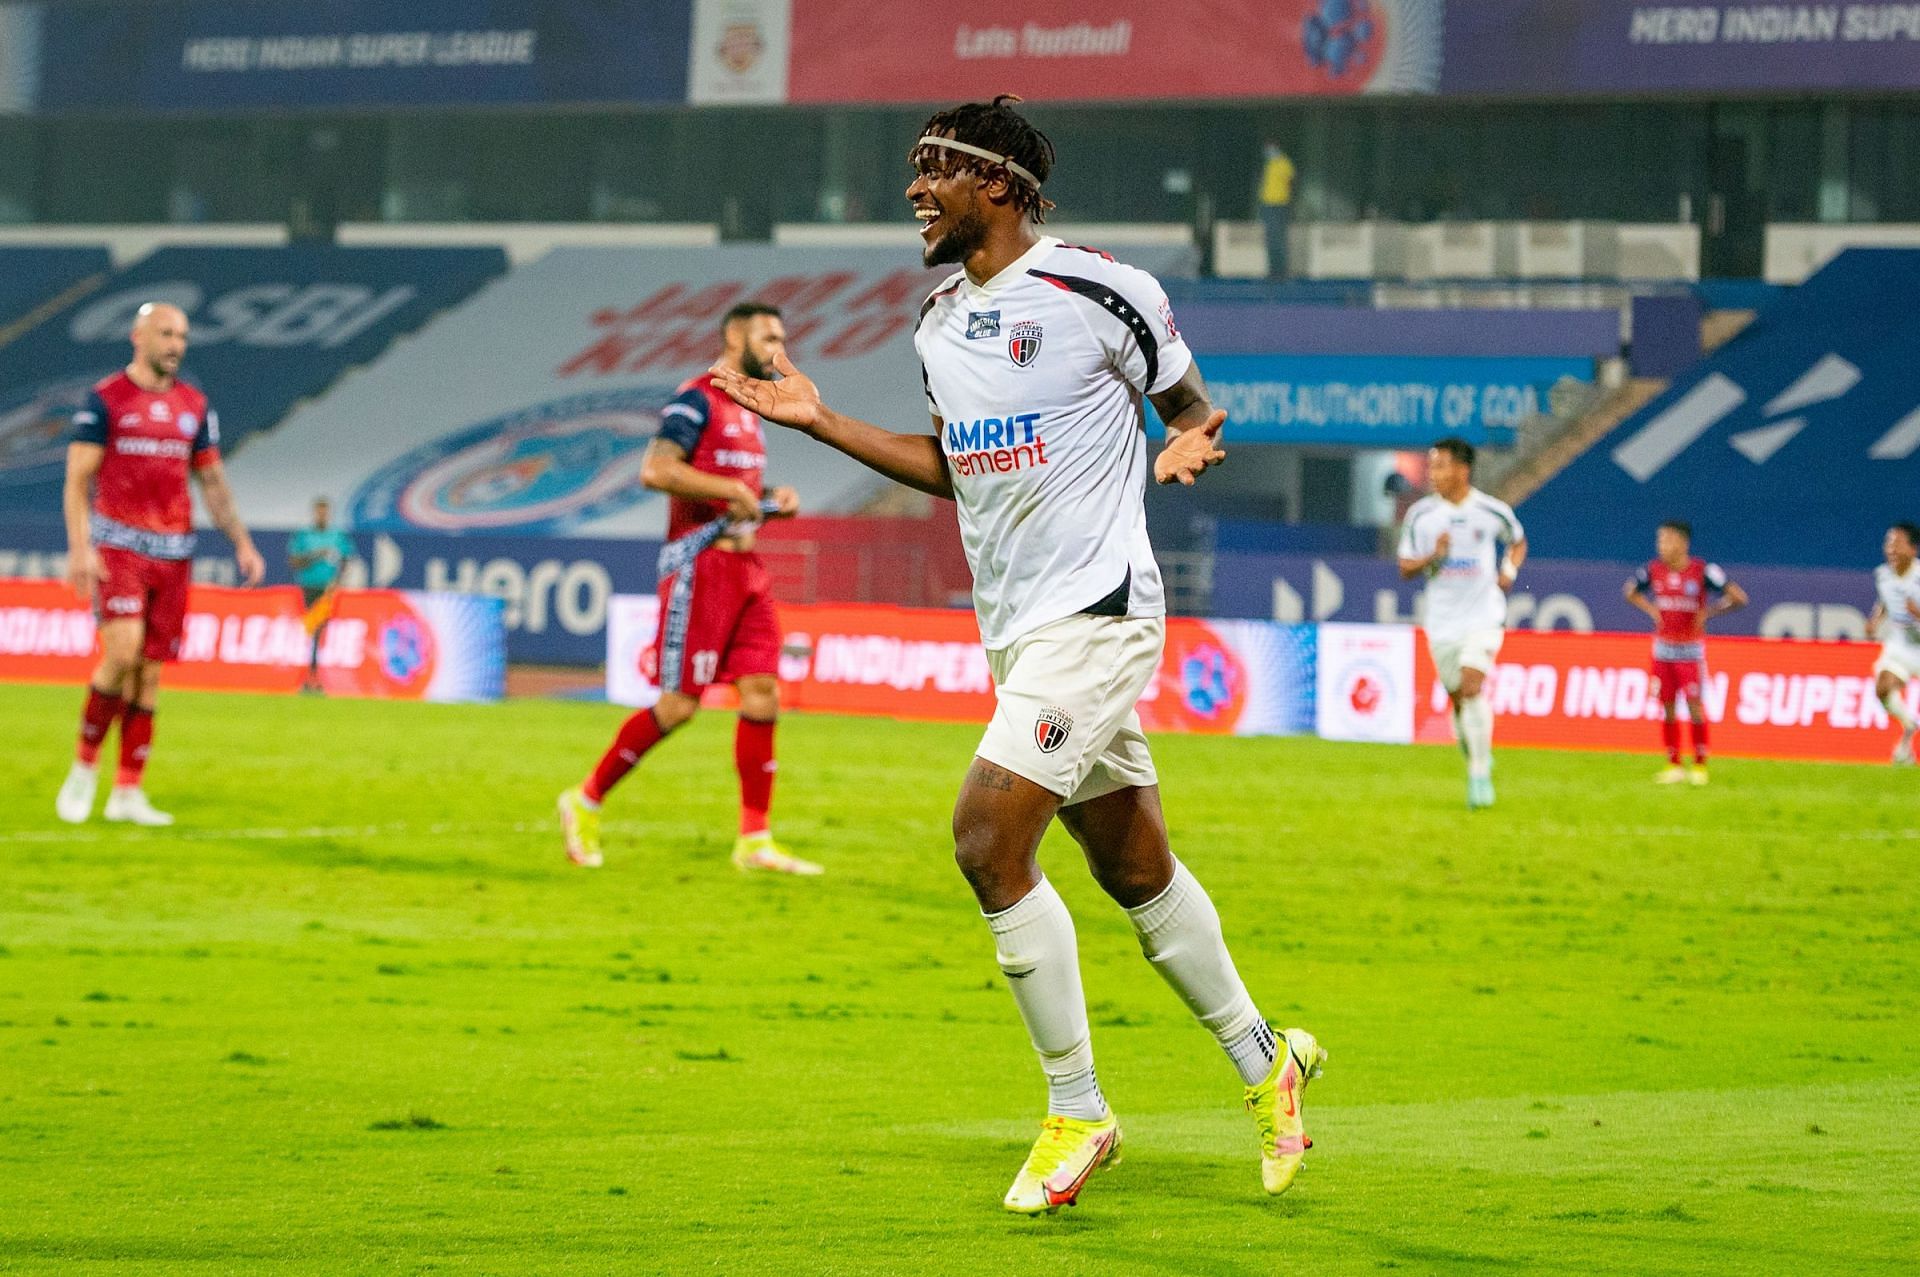 NorthEast United FC&#039;s Deshorn Brown equalized against Jamshedpur FC before Ishan Pandita&#039;s late winner in their first meeting this season. (Image Courtesy: ISL)